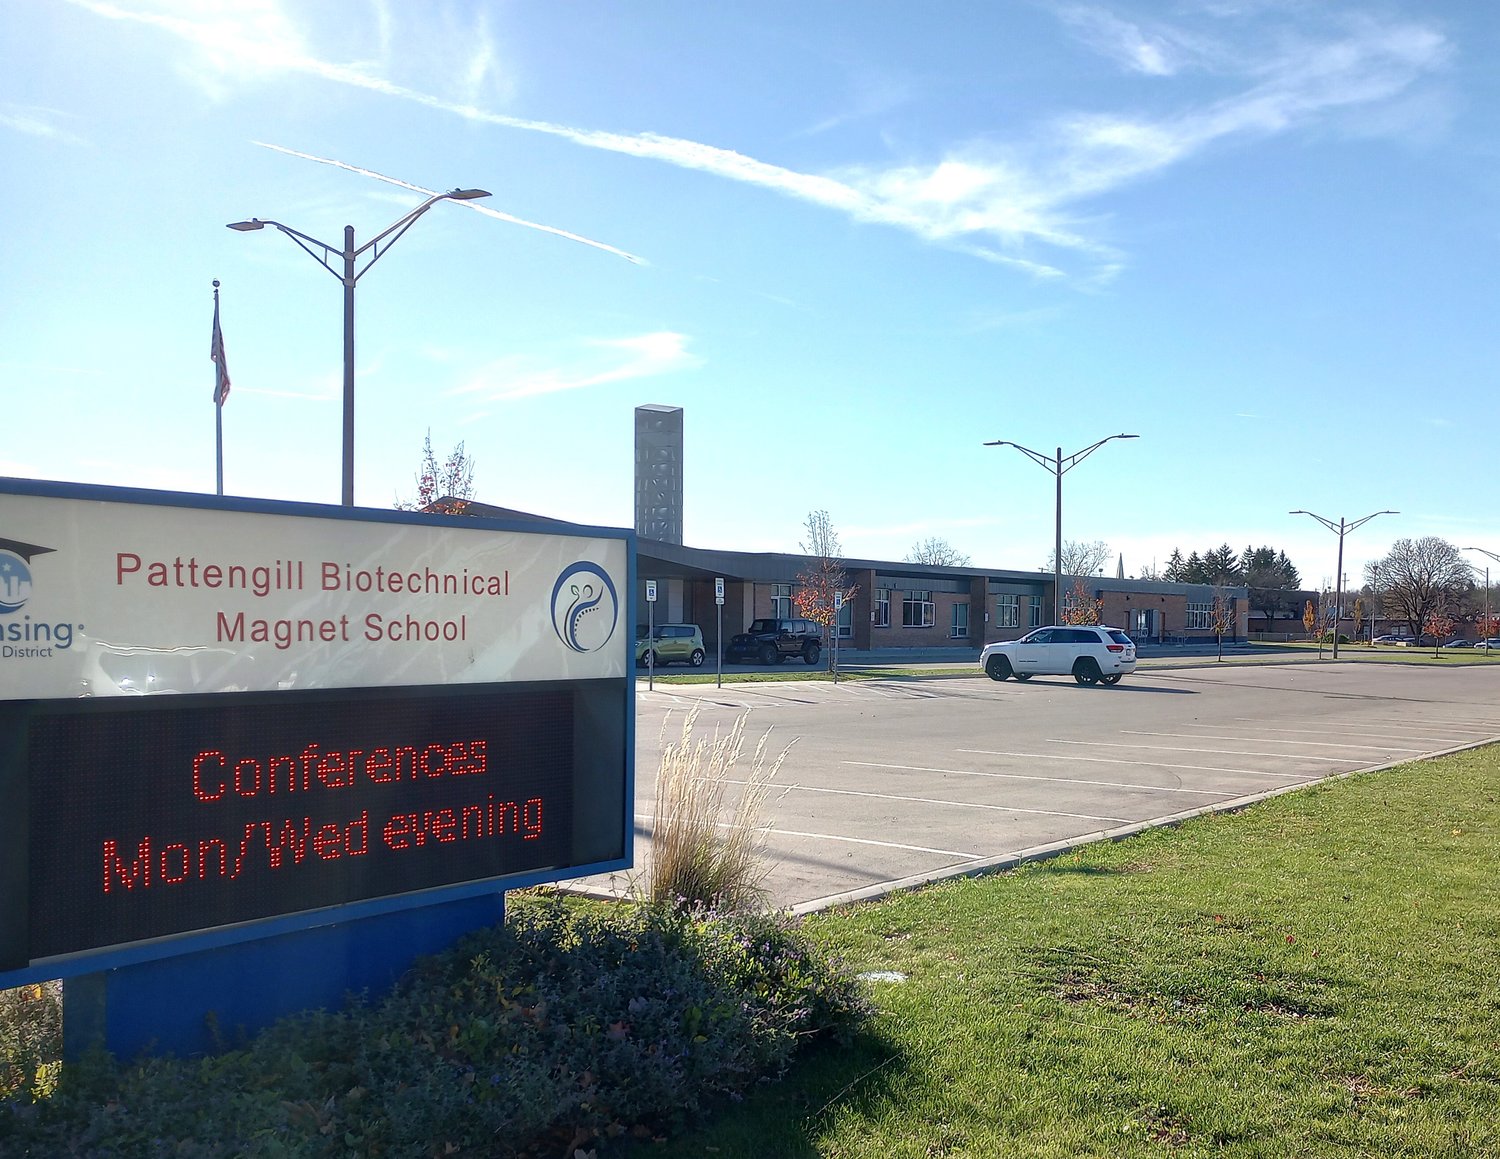 The parking lot at Pattengill Biotechnical Magnet School was quiet Tuesday because the school was closed, but parents and officials are concerned about the safety of children because of what a neighborhood leader called a “circle of chaos” during pickup and drop-off times.